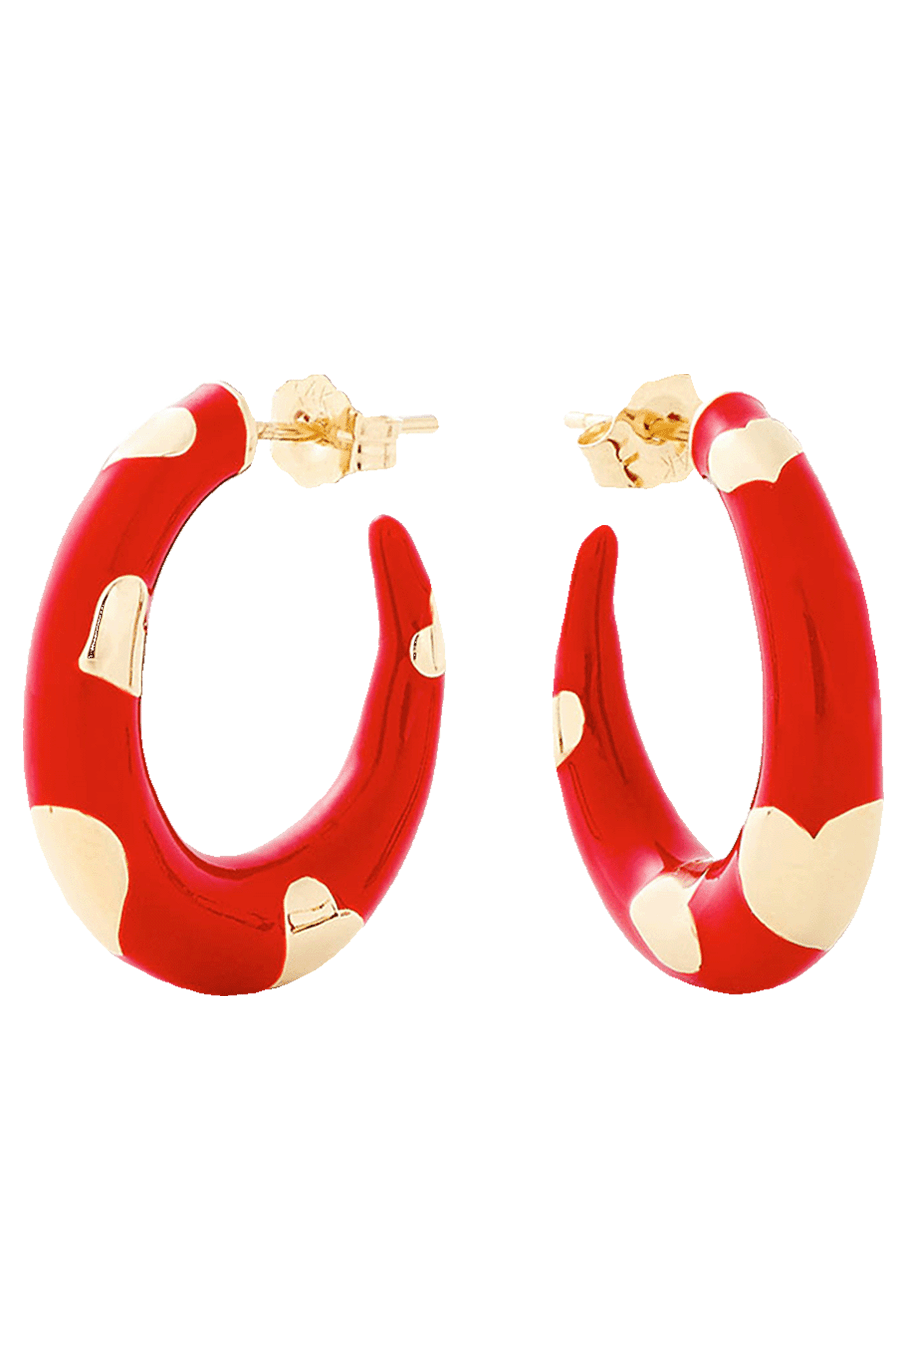 ALISON LOU-Petite Amour Heart Red Hoops-YELLOW GOLD